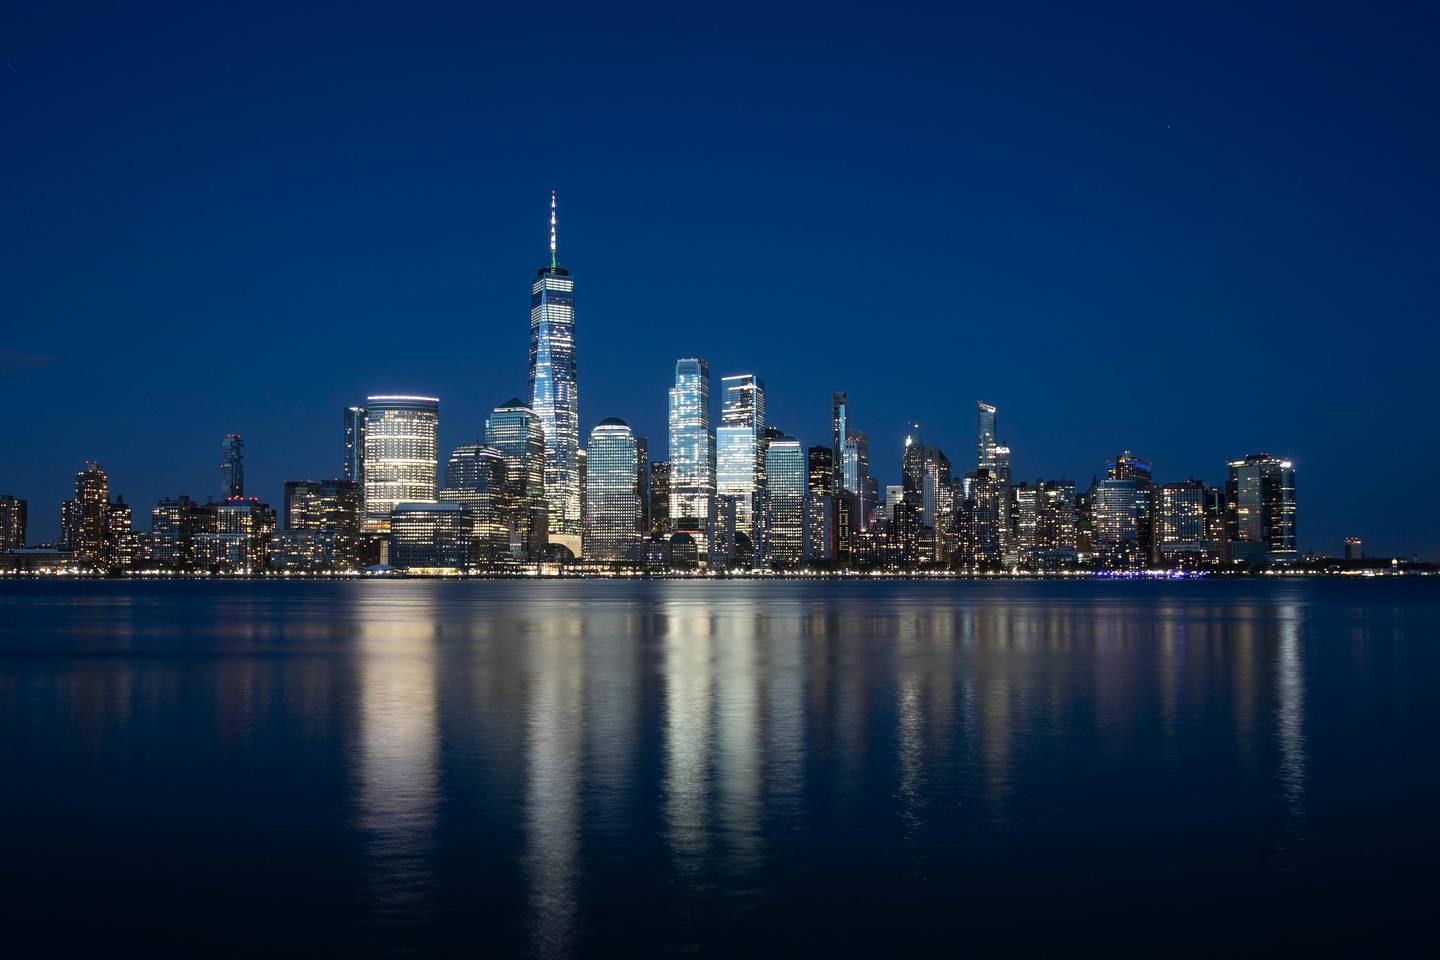 The Manhattan skyline is seen from Jersey City, N.J., Tuesday night, April 28, 2020, during the coronavirus pandemic. At the time the photograph was taken the view was a quiet one: there were no boats or ships visible on the Hudson River and no airplanes or helicopters flying over the city. (AP Photo/Mark Lennihan)